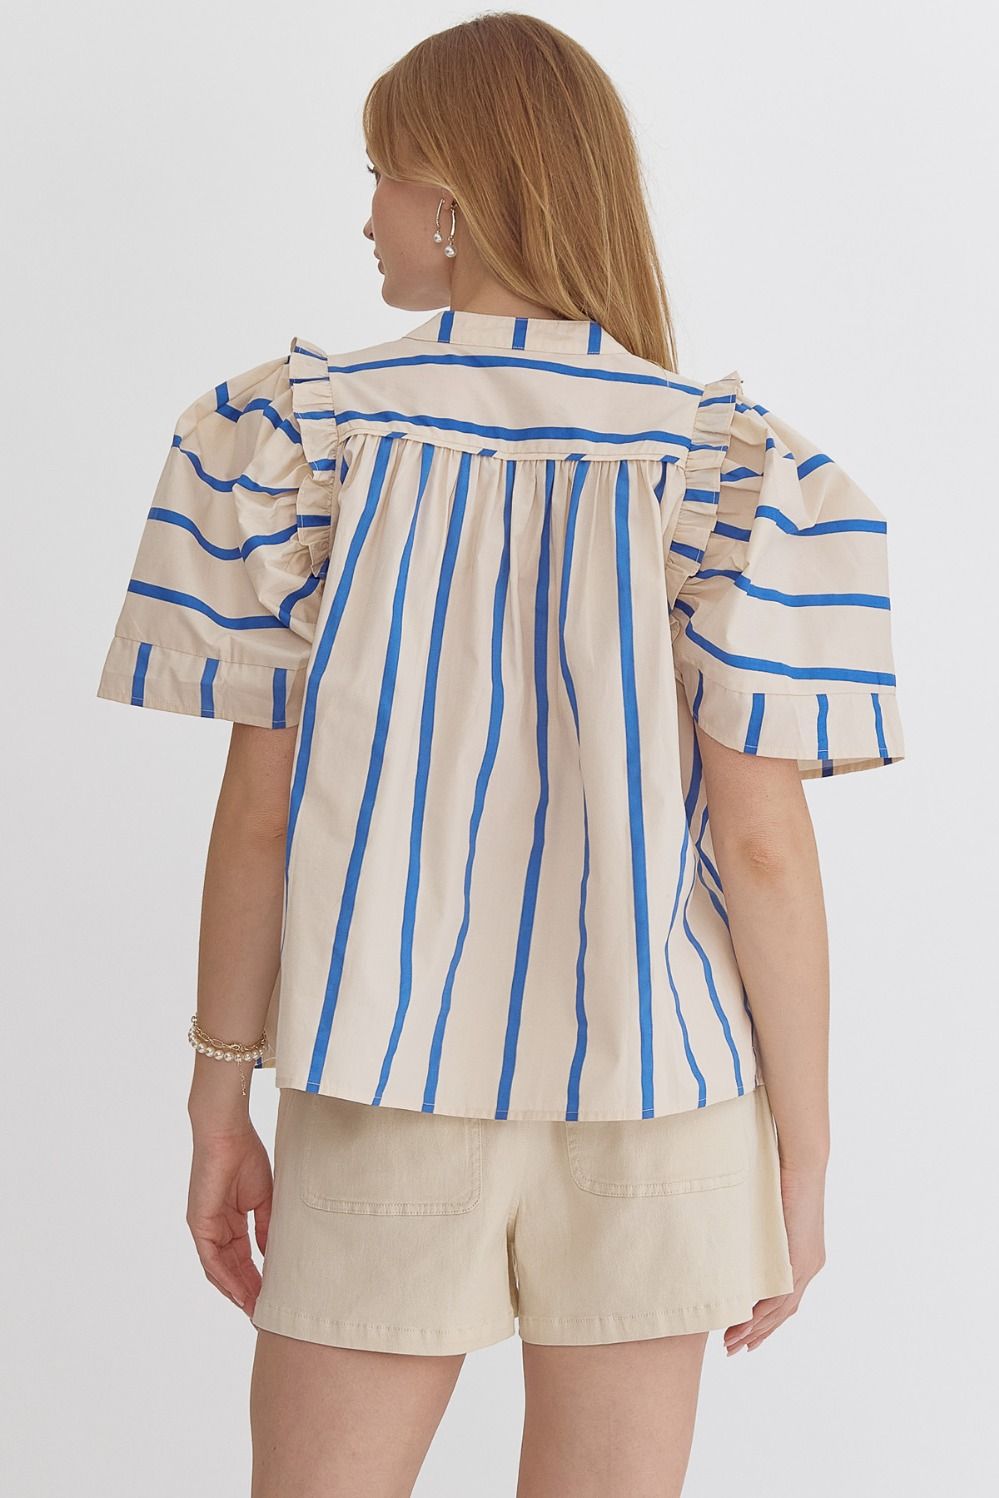 Entro | Striped Short Sleeve Top | Sweetest Stitch Shop Cute Tops